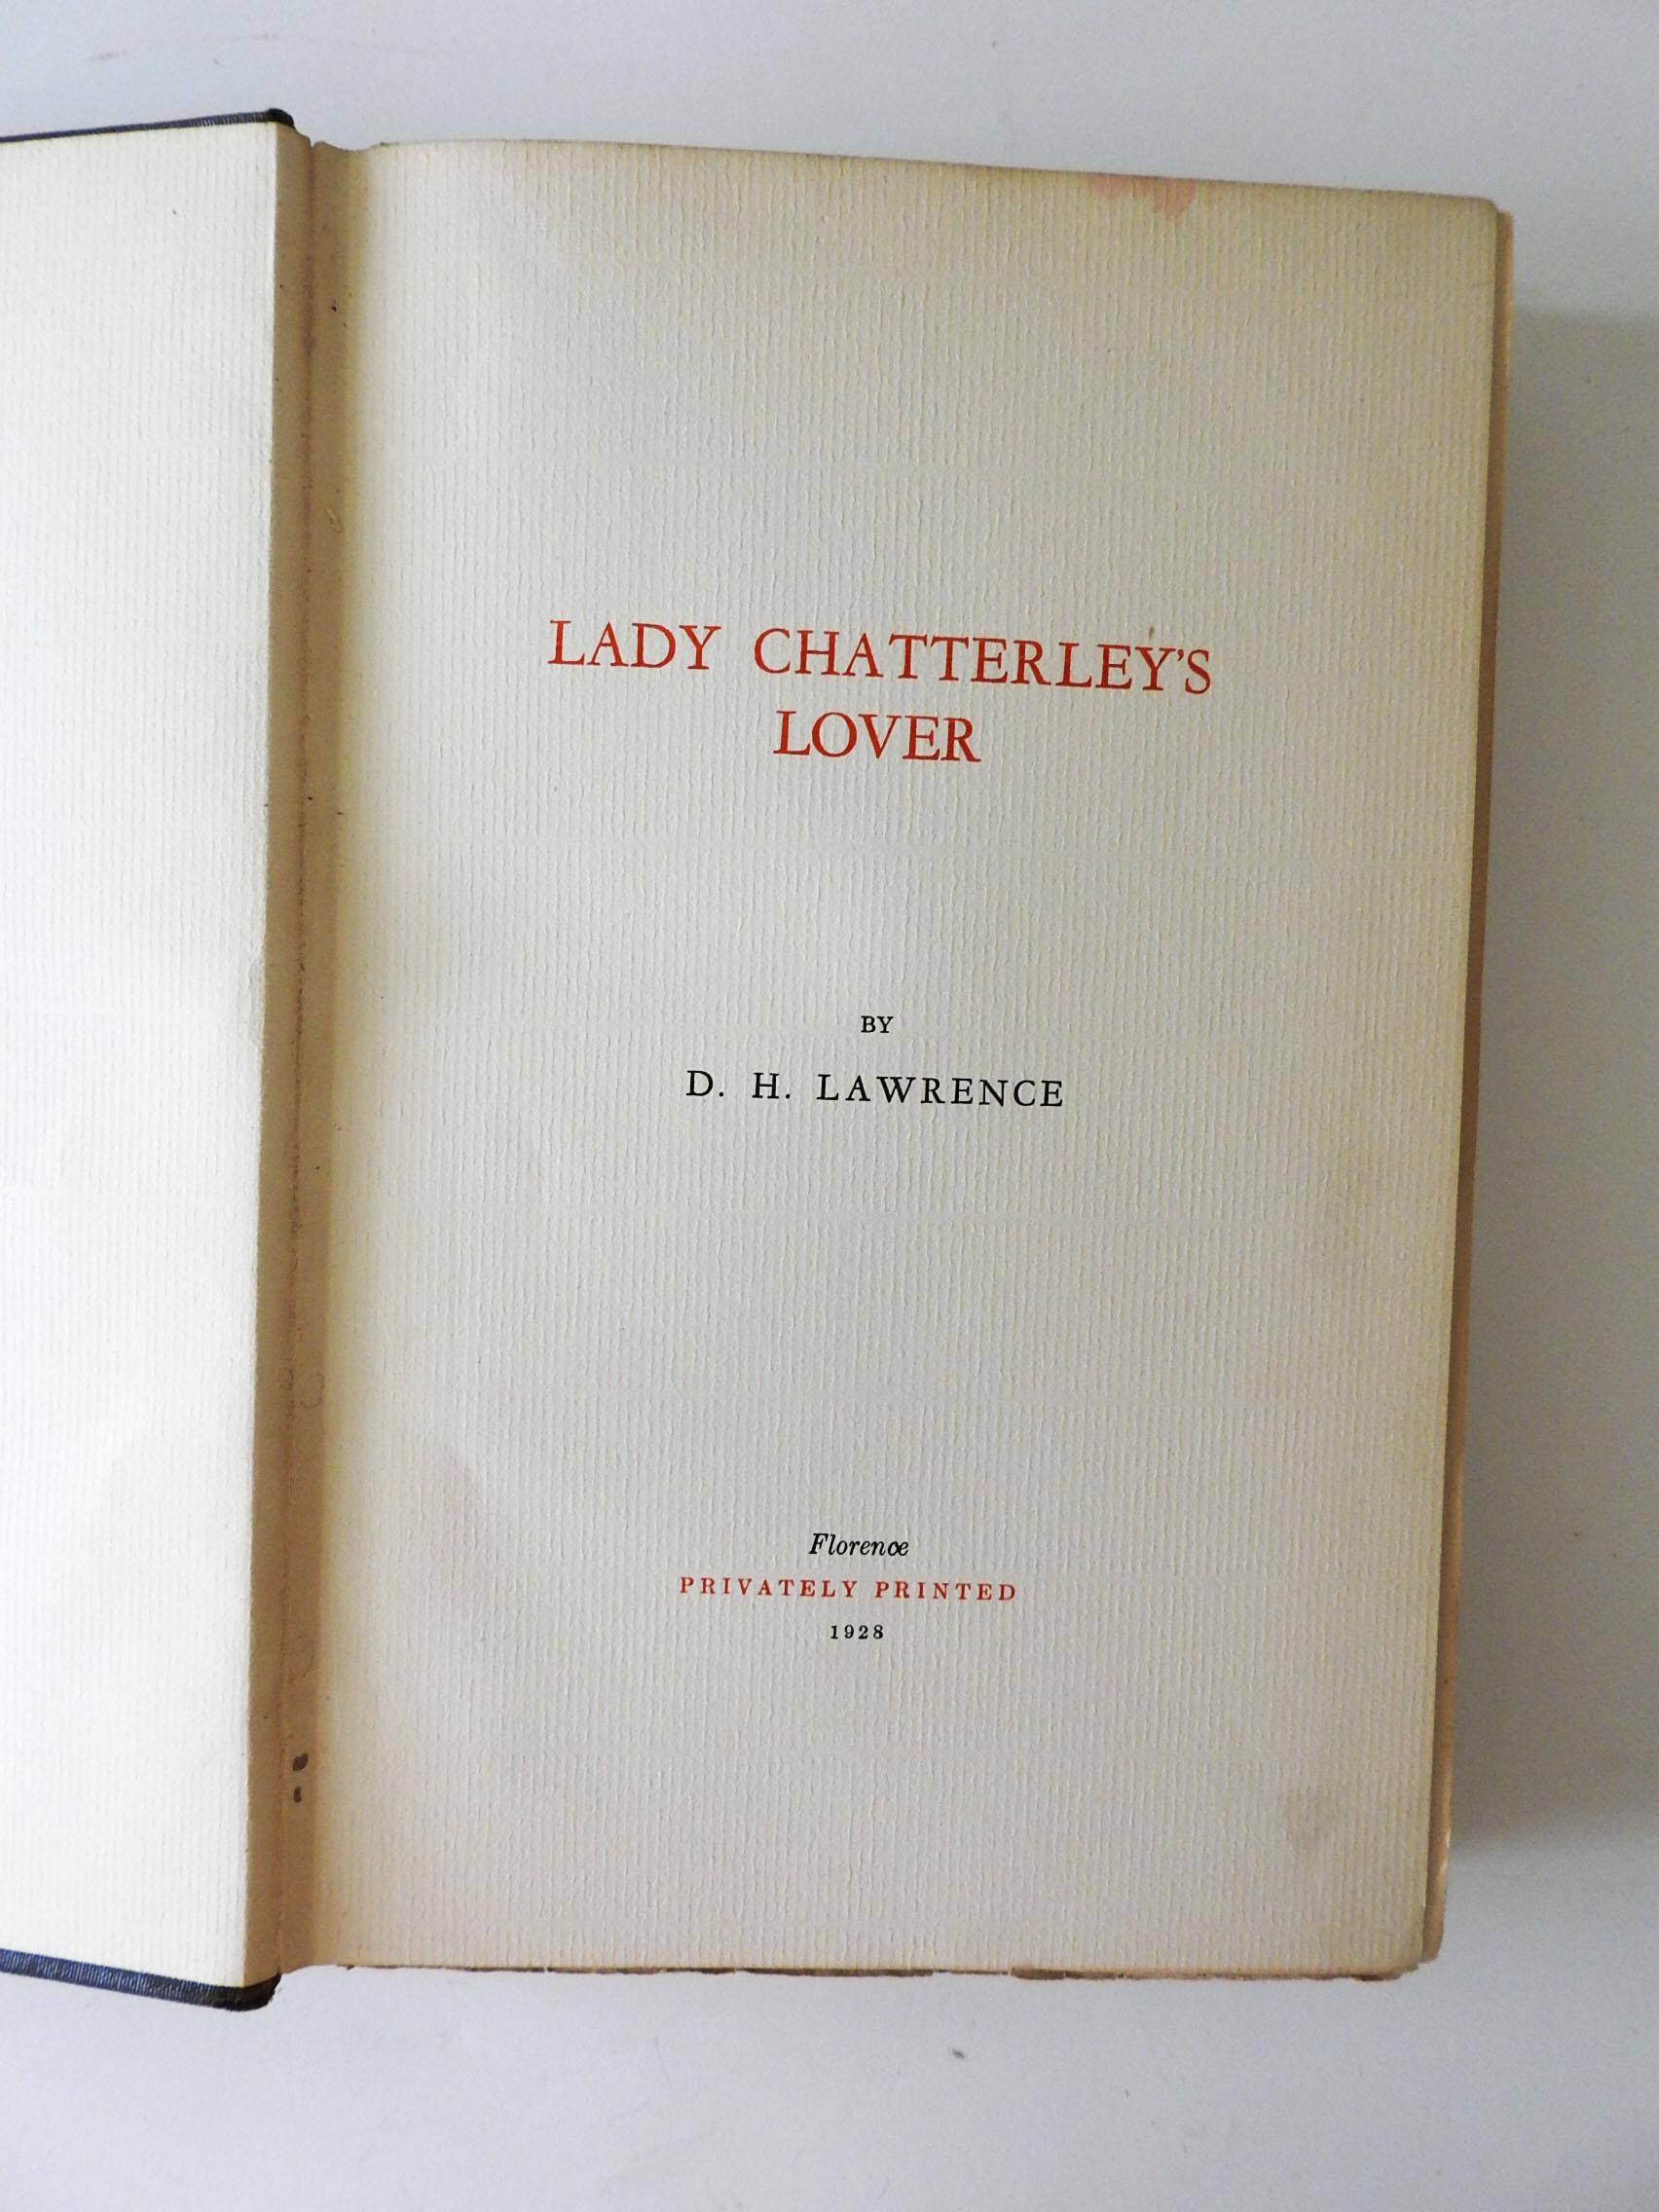 Lady Chatterley's Lover by D.H. Lawrence. Published by Privately Printed , Florence., Italy., 1928 An early pirated edition now quite scarce. Original black moire patterned cloth with a paper label on the spine printed in red and black, red end